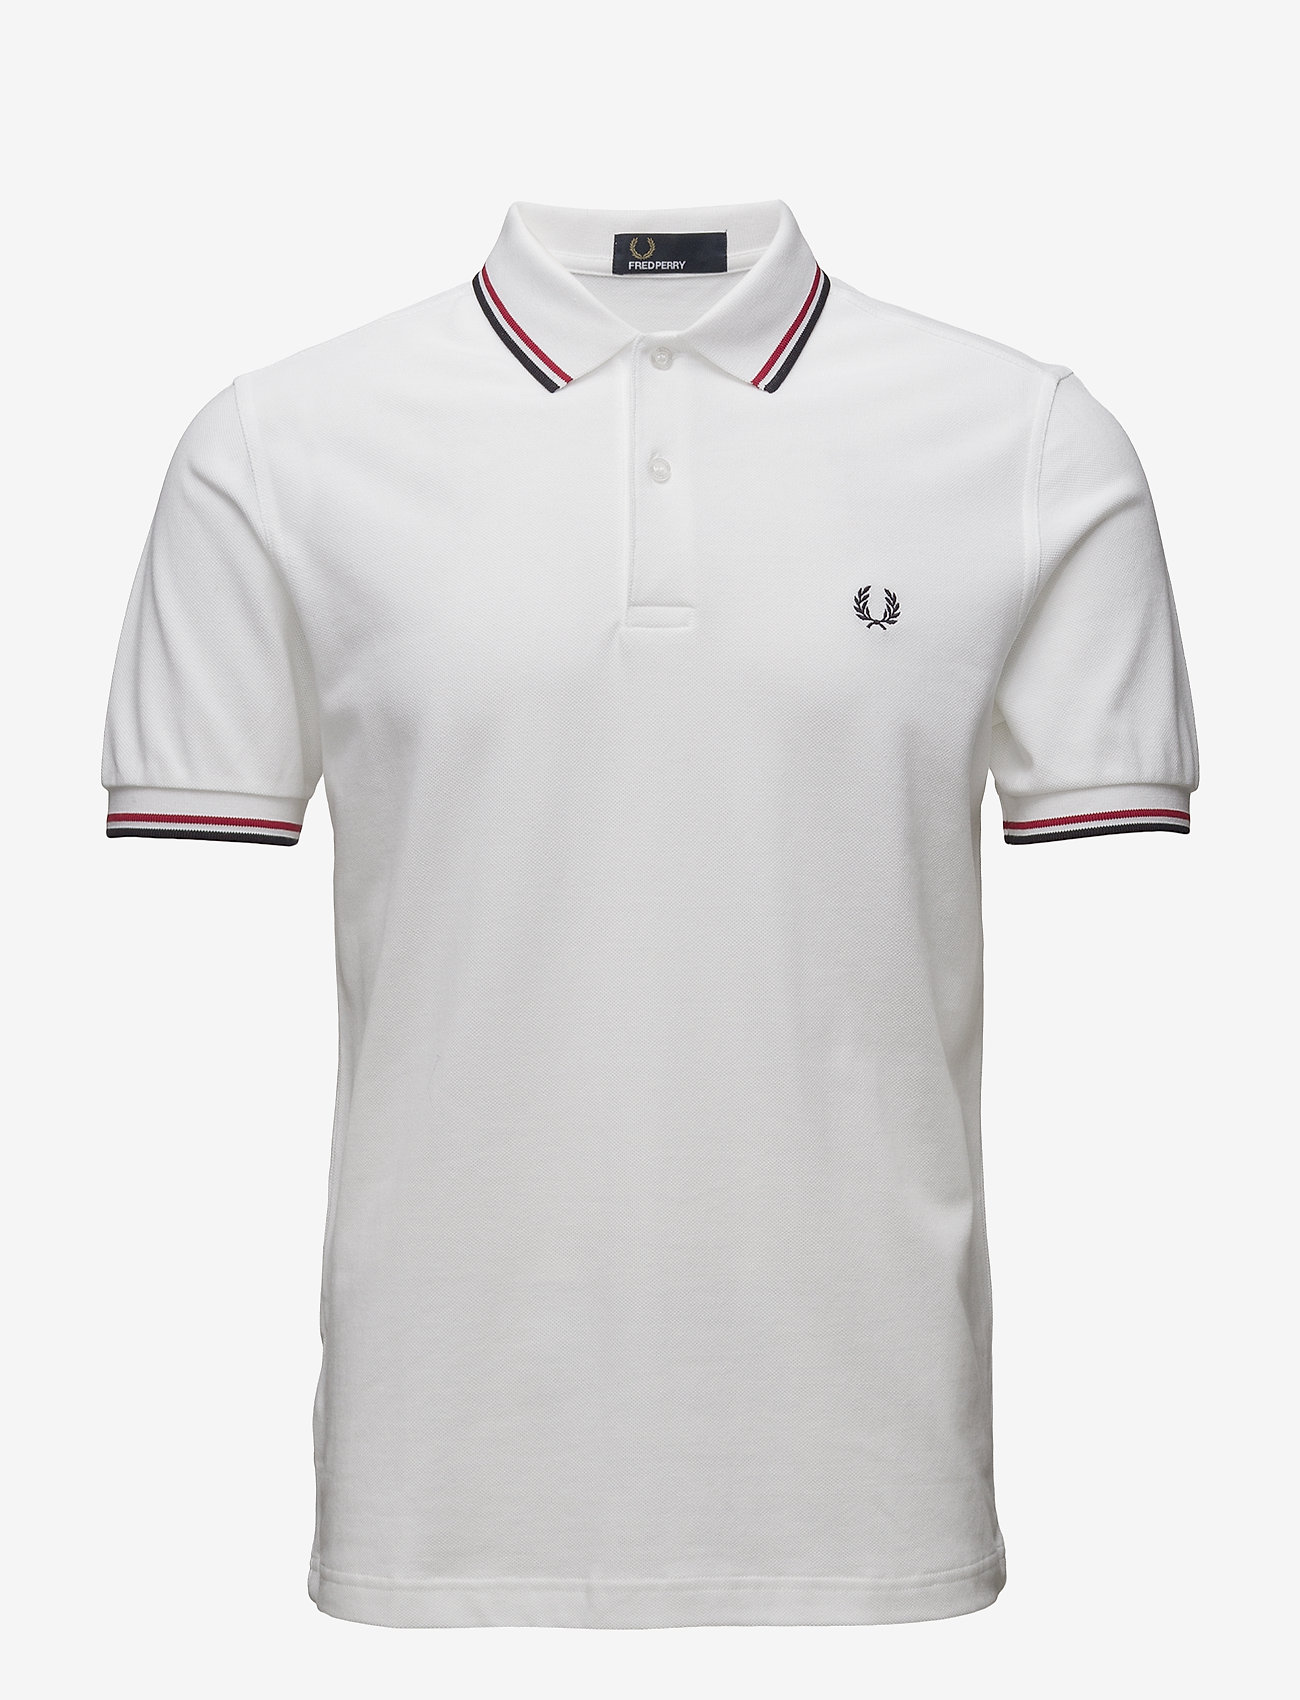 Fred Perry - TWIN TIPPED FP SHIRT - kurzärmelig - white/red - 0